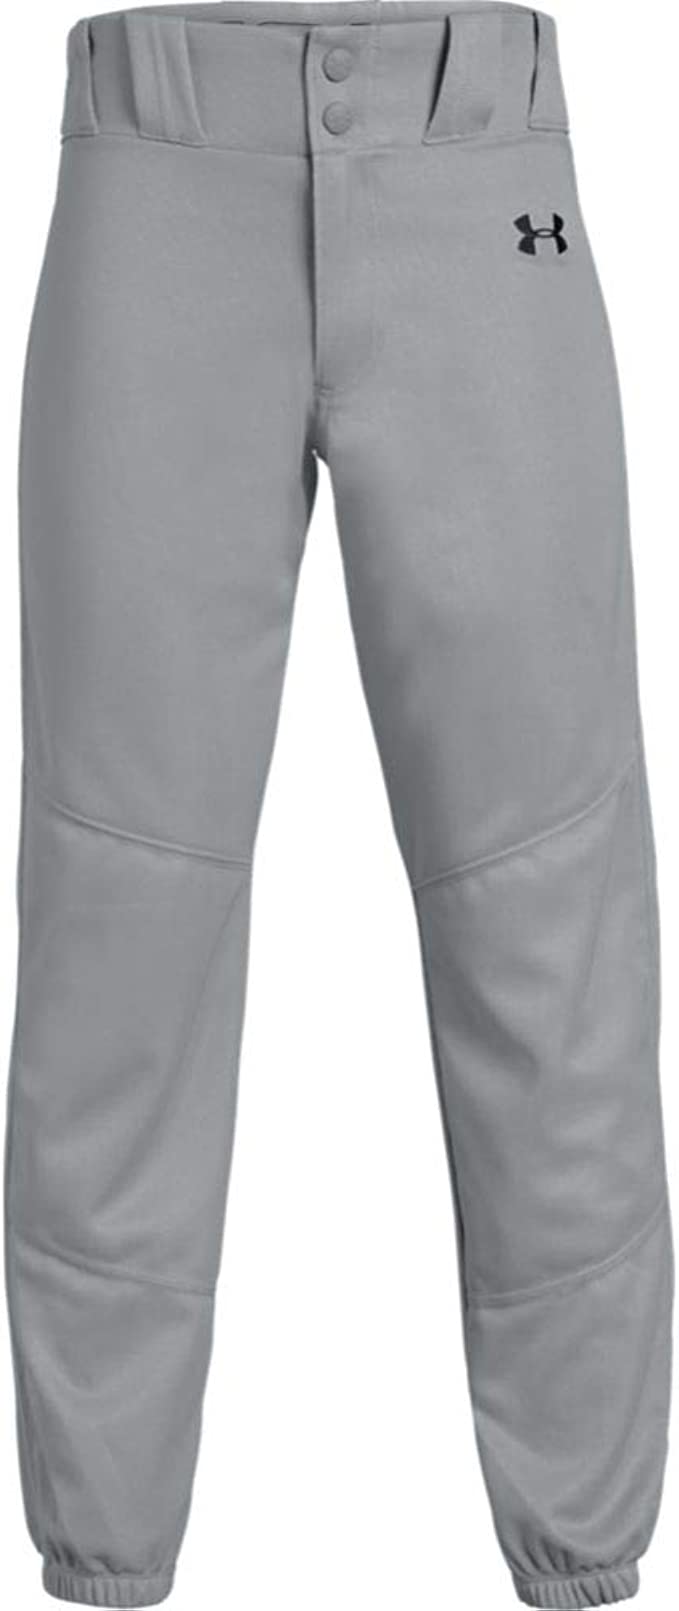 Under Armour Boys' Relaxed Pants